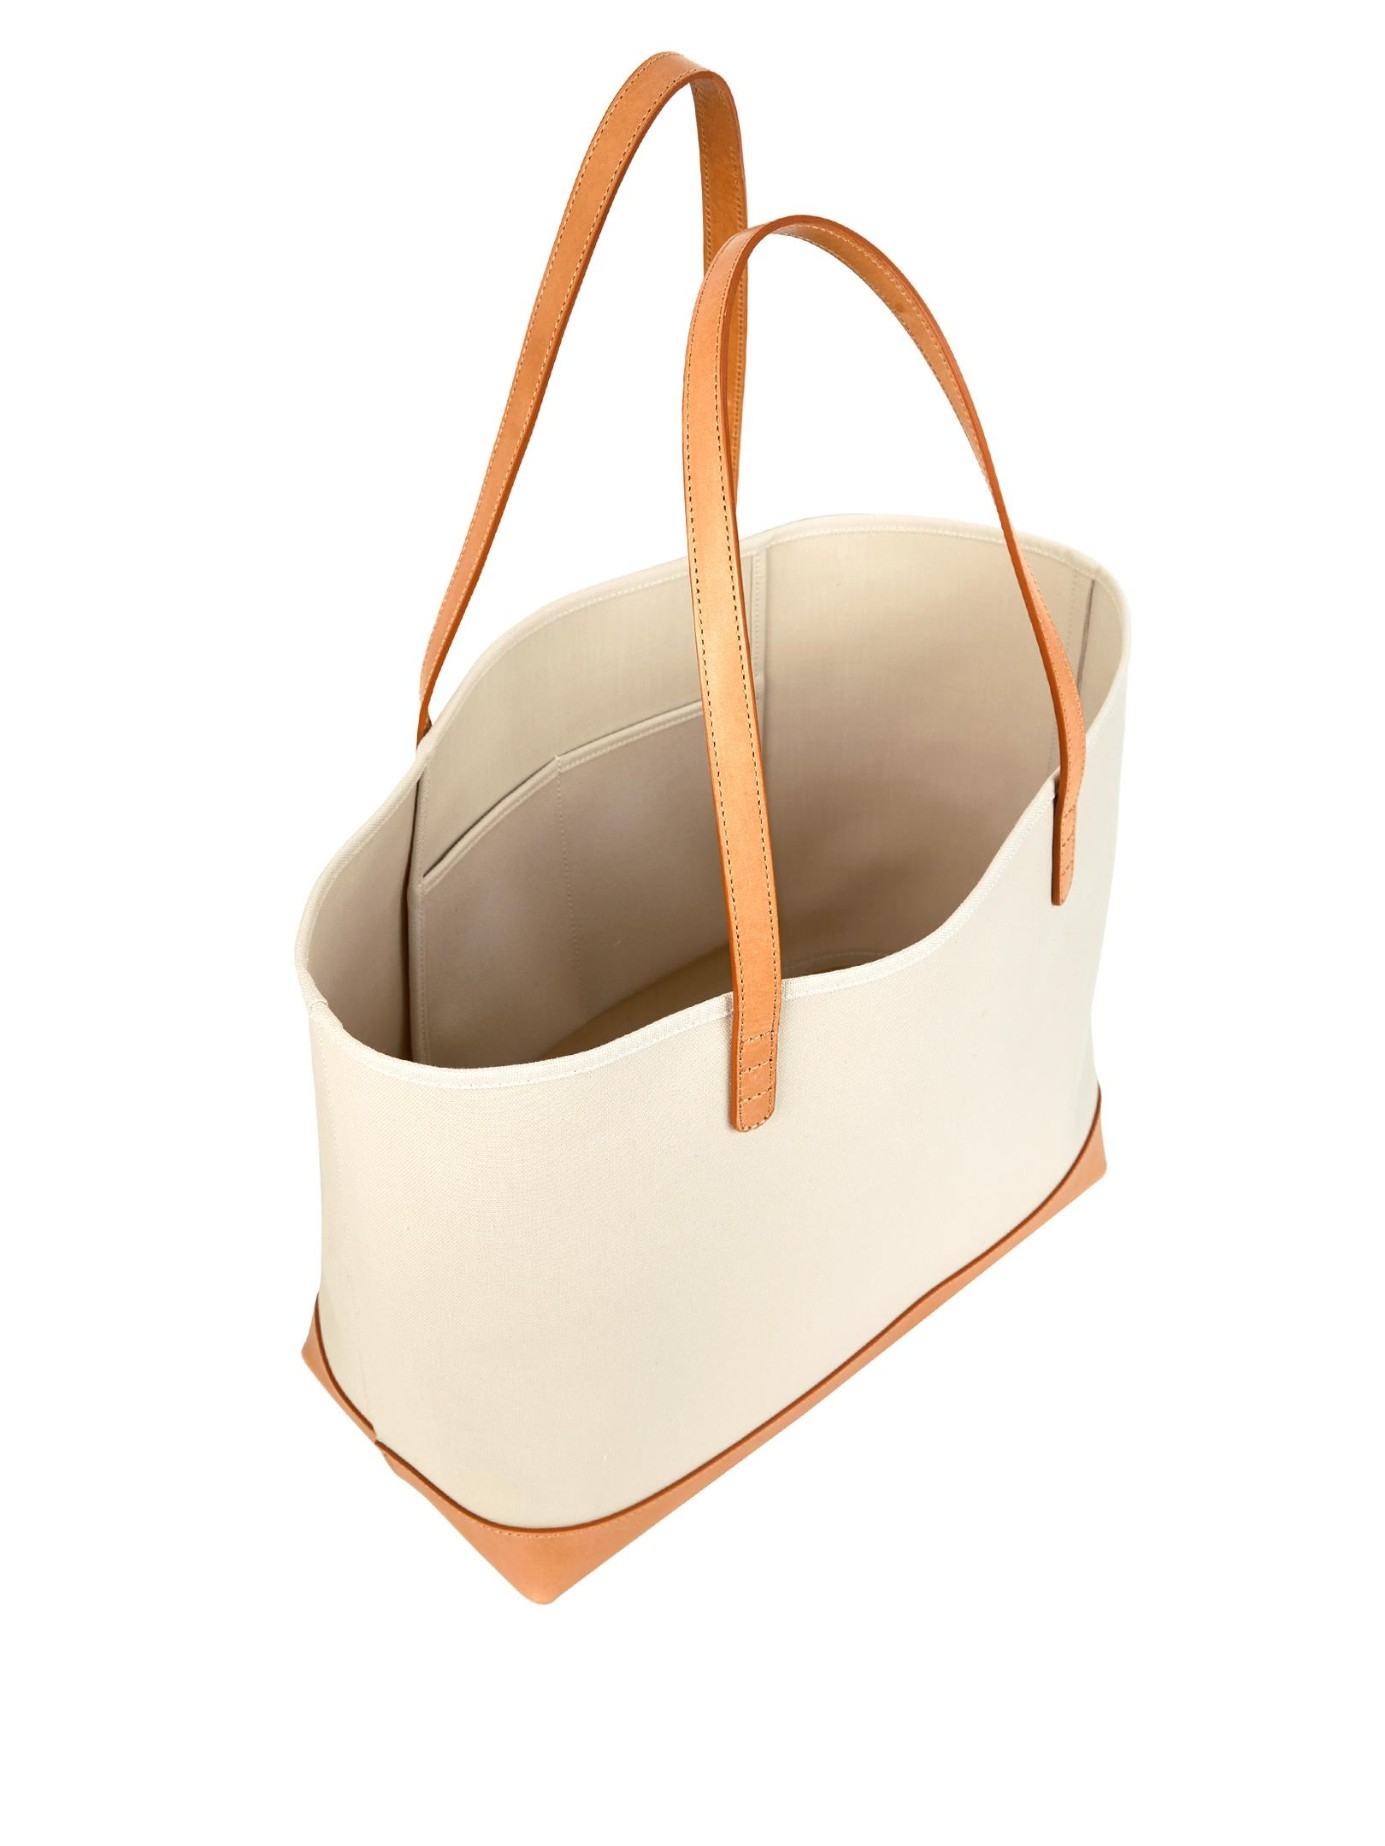 Mansur Gavriel Large Canvas And Leather Tote in Tan White (White) - Lyst